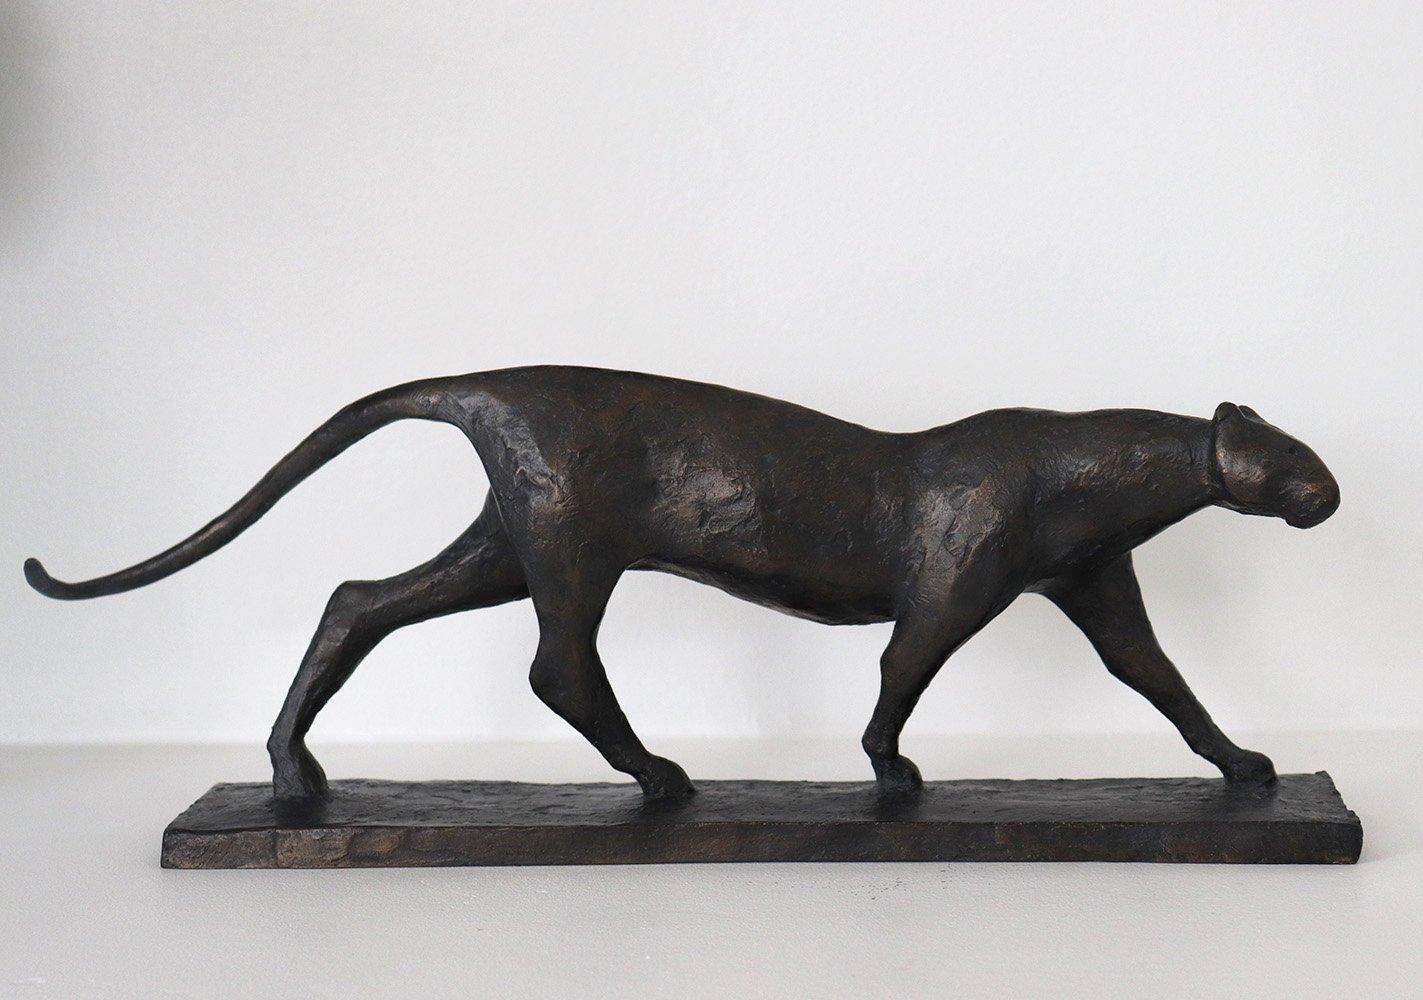 Feline V is a bronze sculpture by French contemporary artist Pierre Yermia which represents a walking feline (a leopard, a jaguar or a cheetah). 
Dimensions: H 6.7 x L 18.1 x W 3.1 in // 17 cm × 46 cm × 8 cm. Edition of 8 & 4 Artist's proofs, each